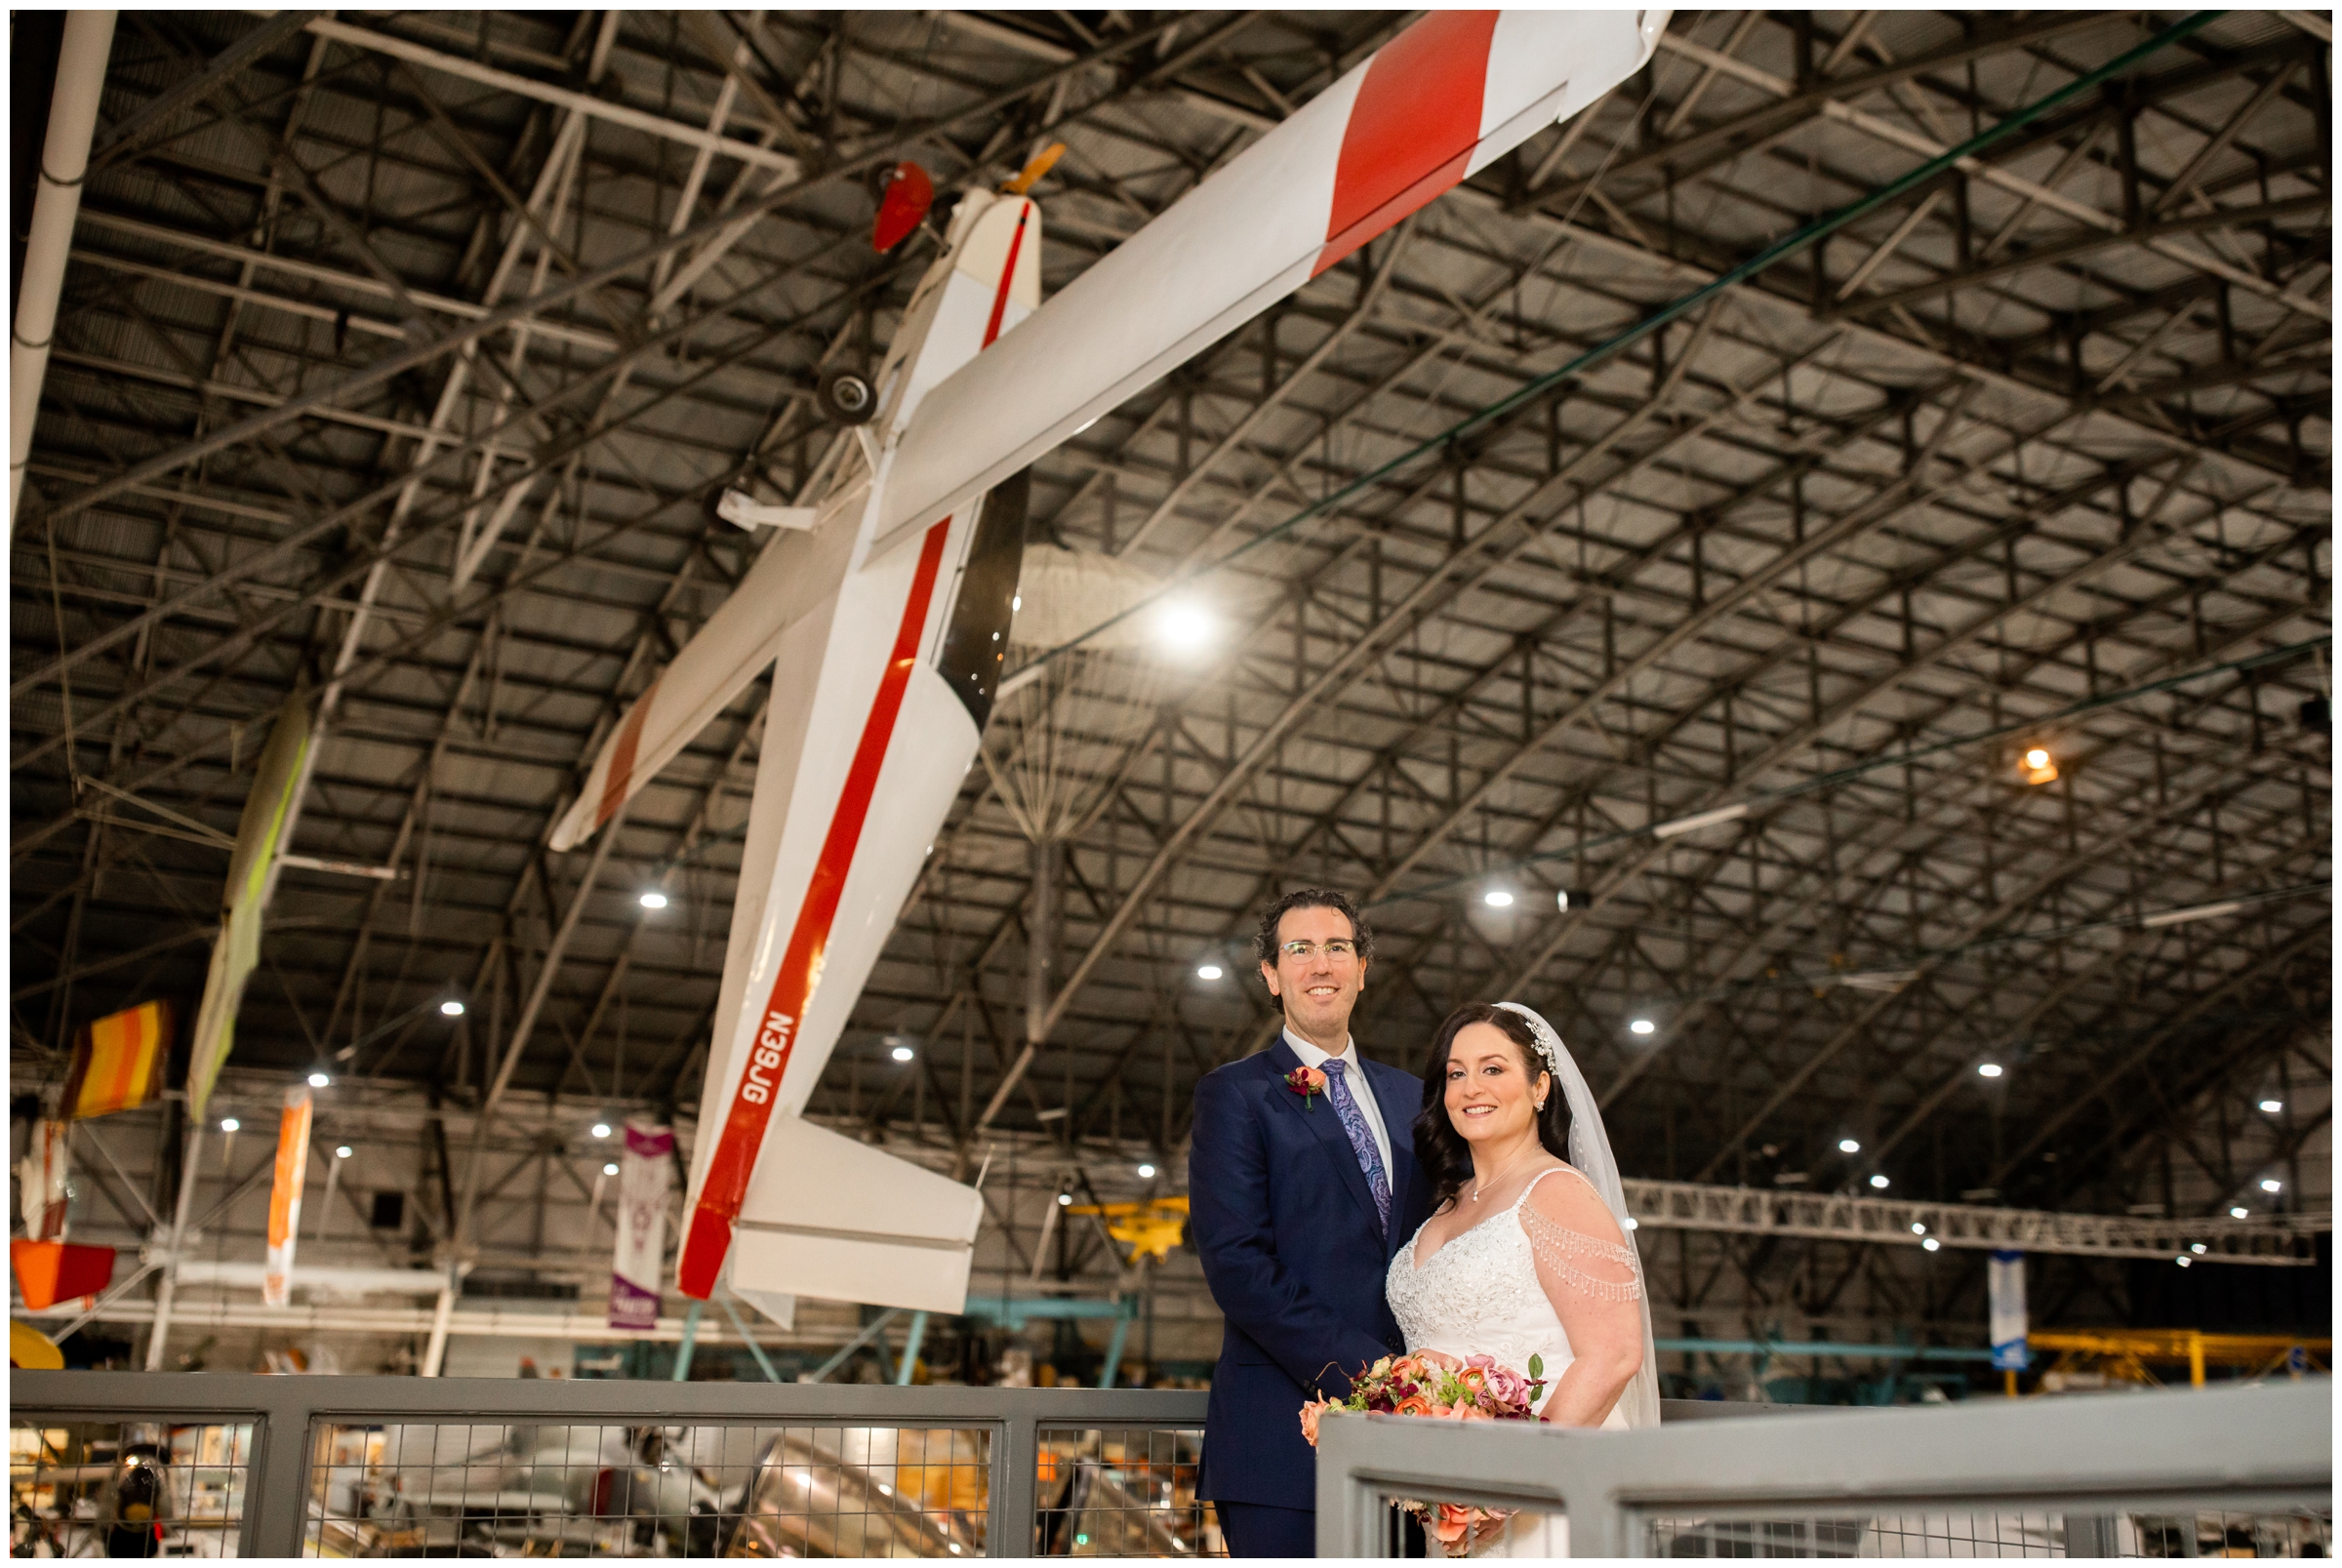 indoor winter wedding inspiration at an airplane museum in Denver Colorado 